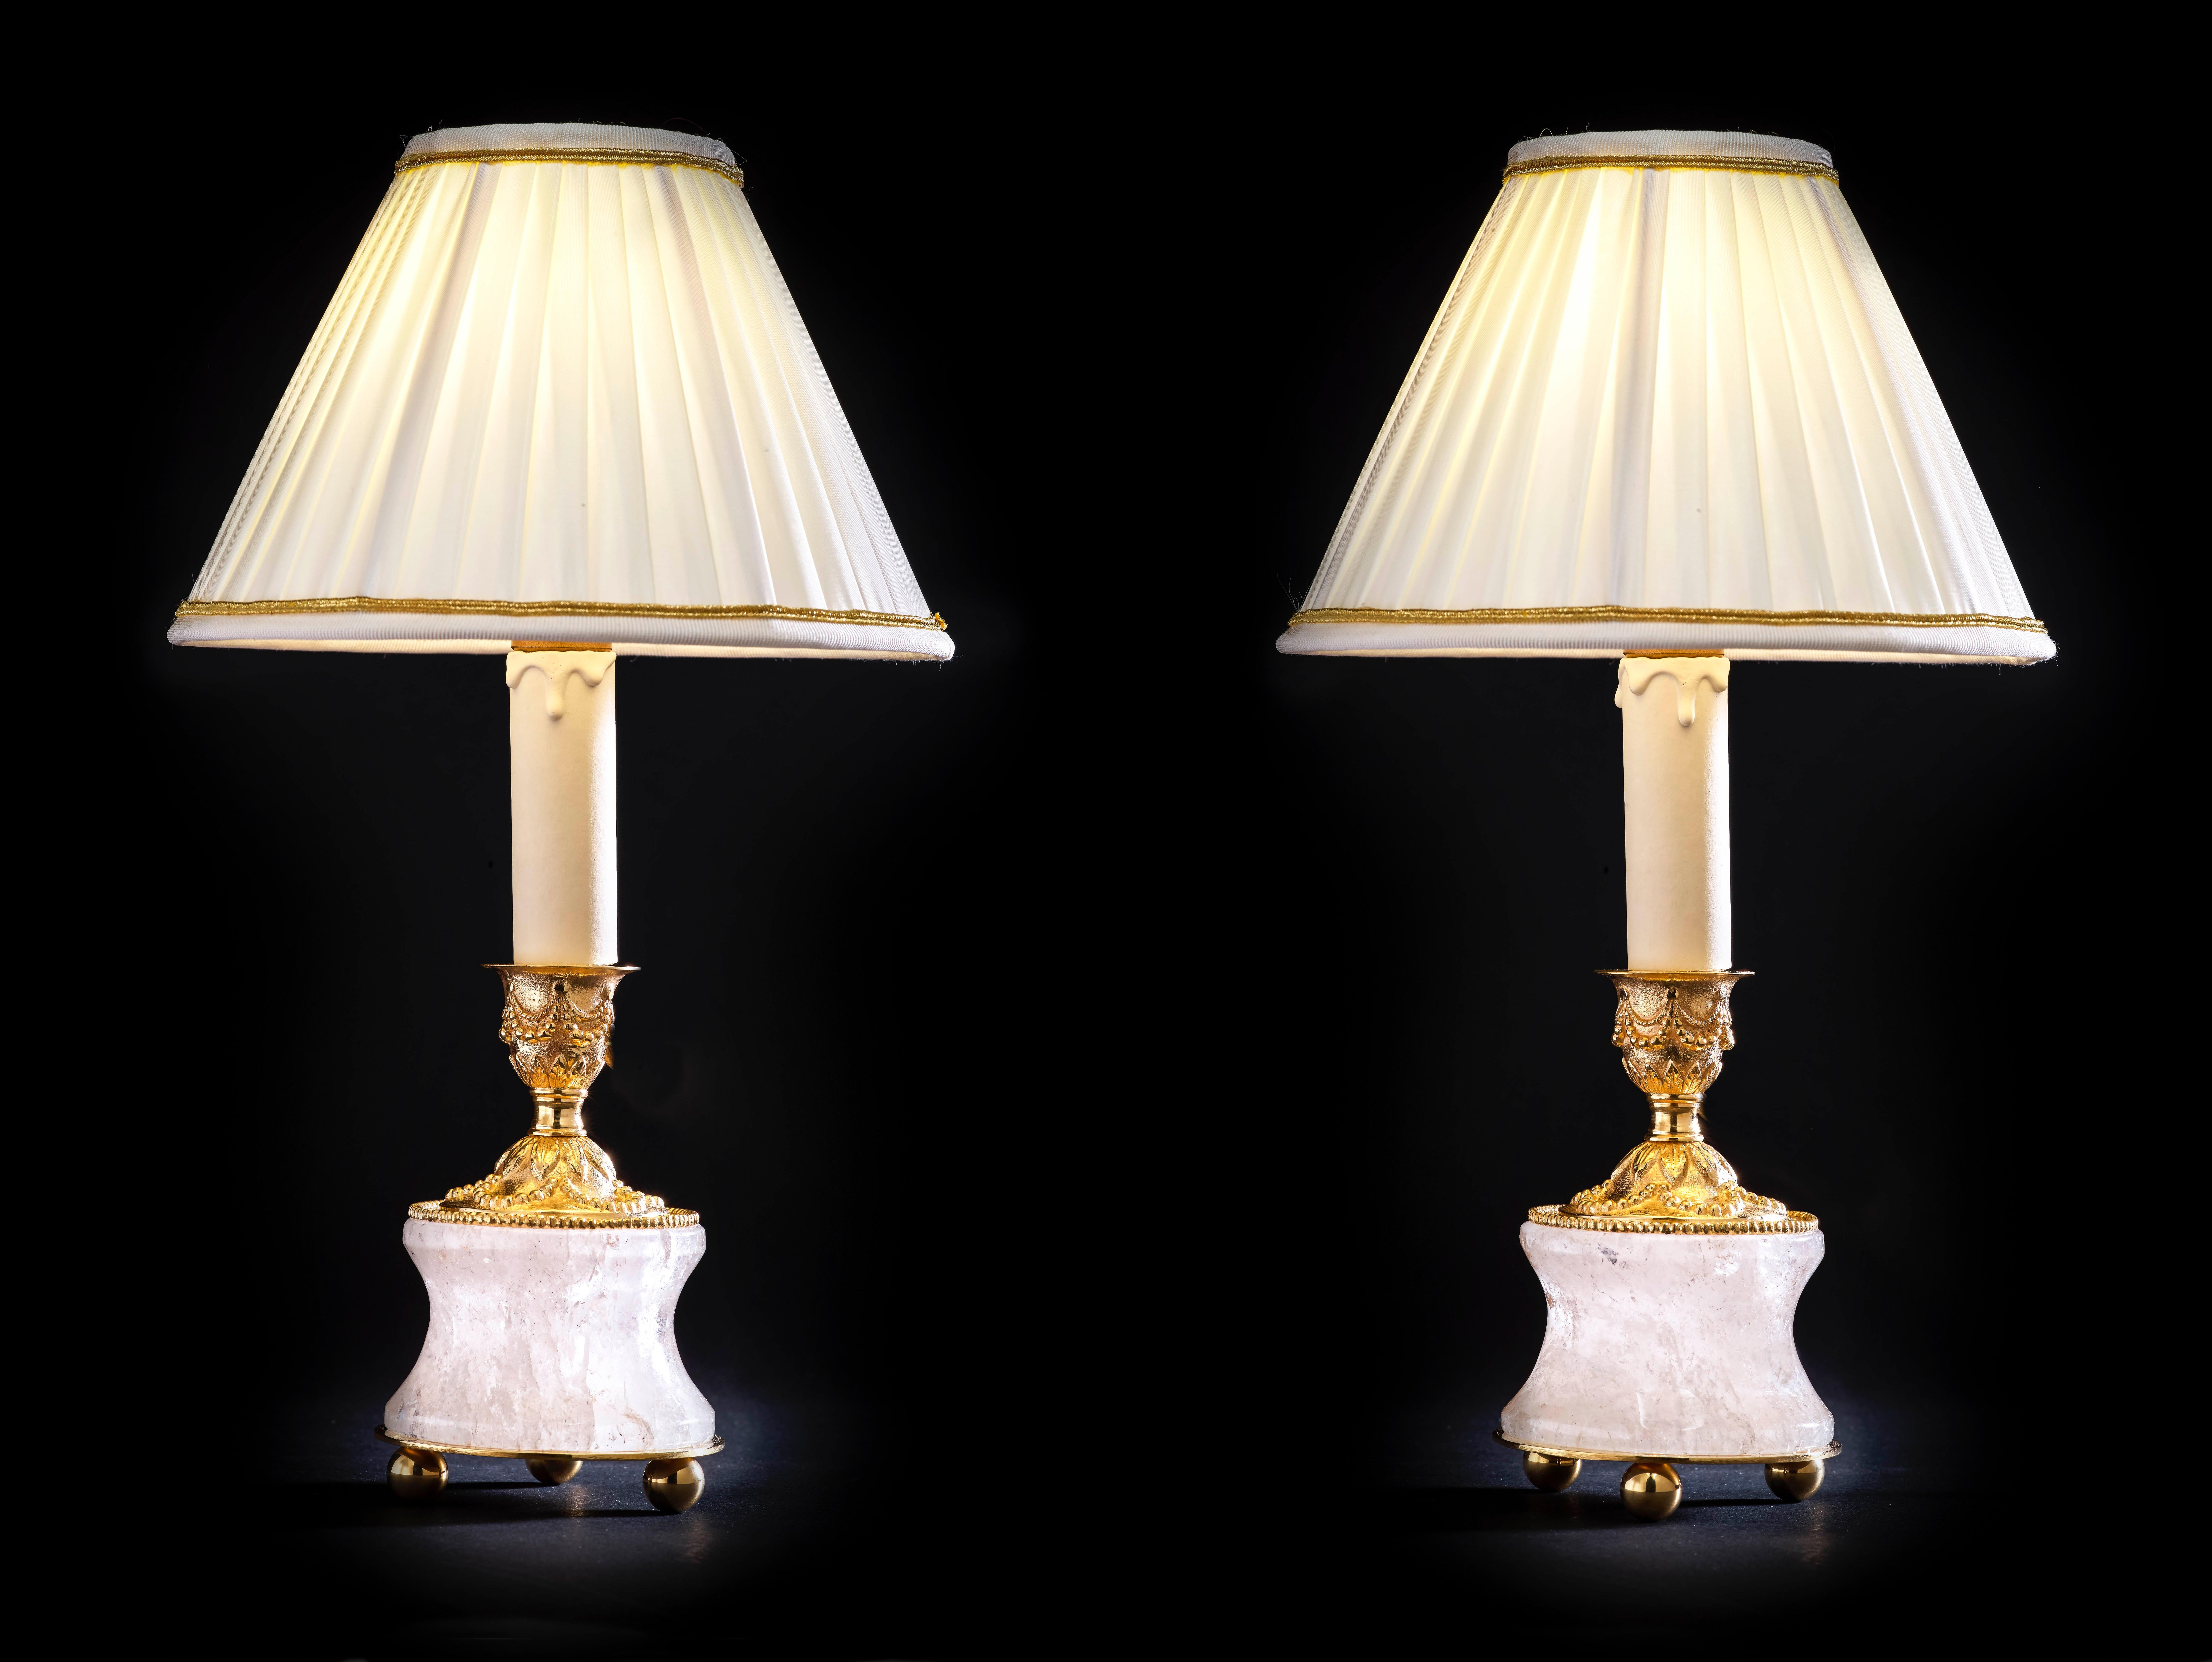 Rock crystal lamps by Alexandre Vossion.
Model I, Louis XVI style.
Rock crystal polished and carved stone, bronze, 24-karat gilding, customized lampshade.
Two in ones: you can easily used as a pair of candlesticks on your dining table but also as